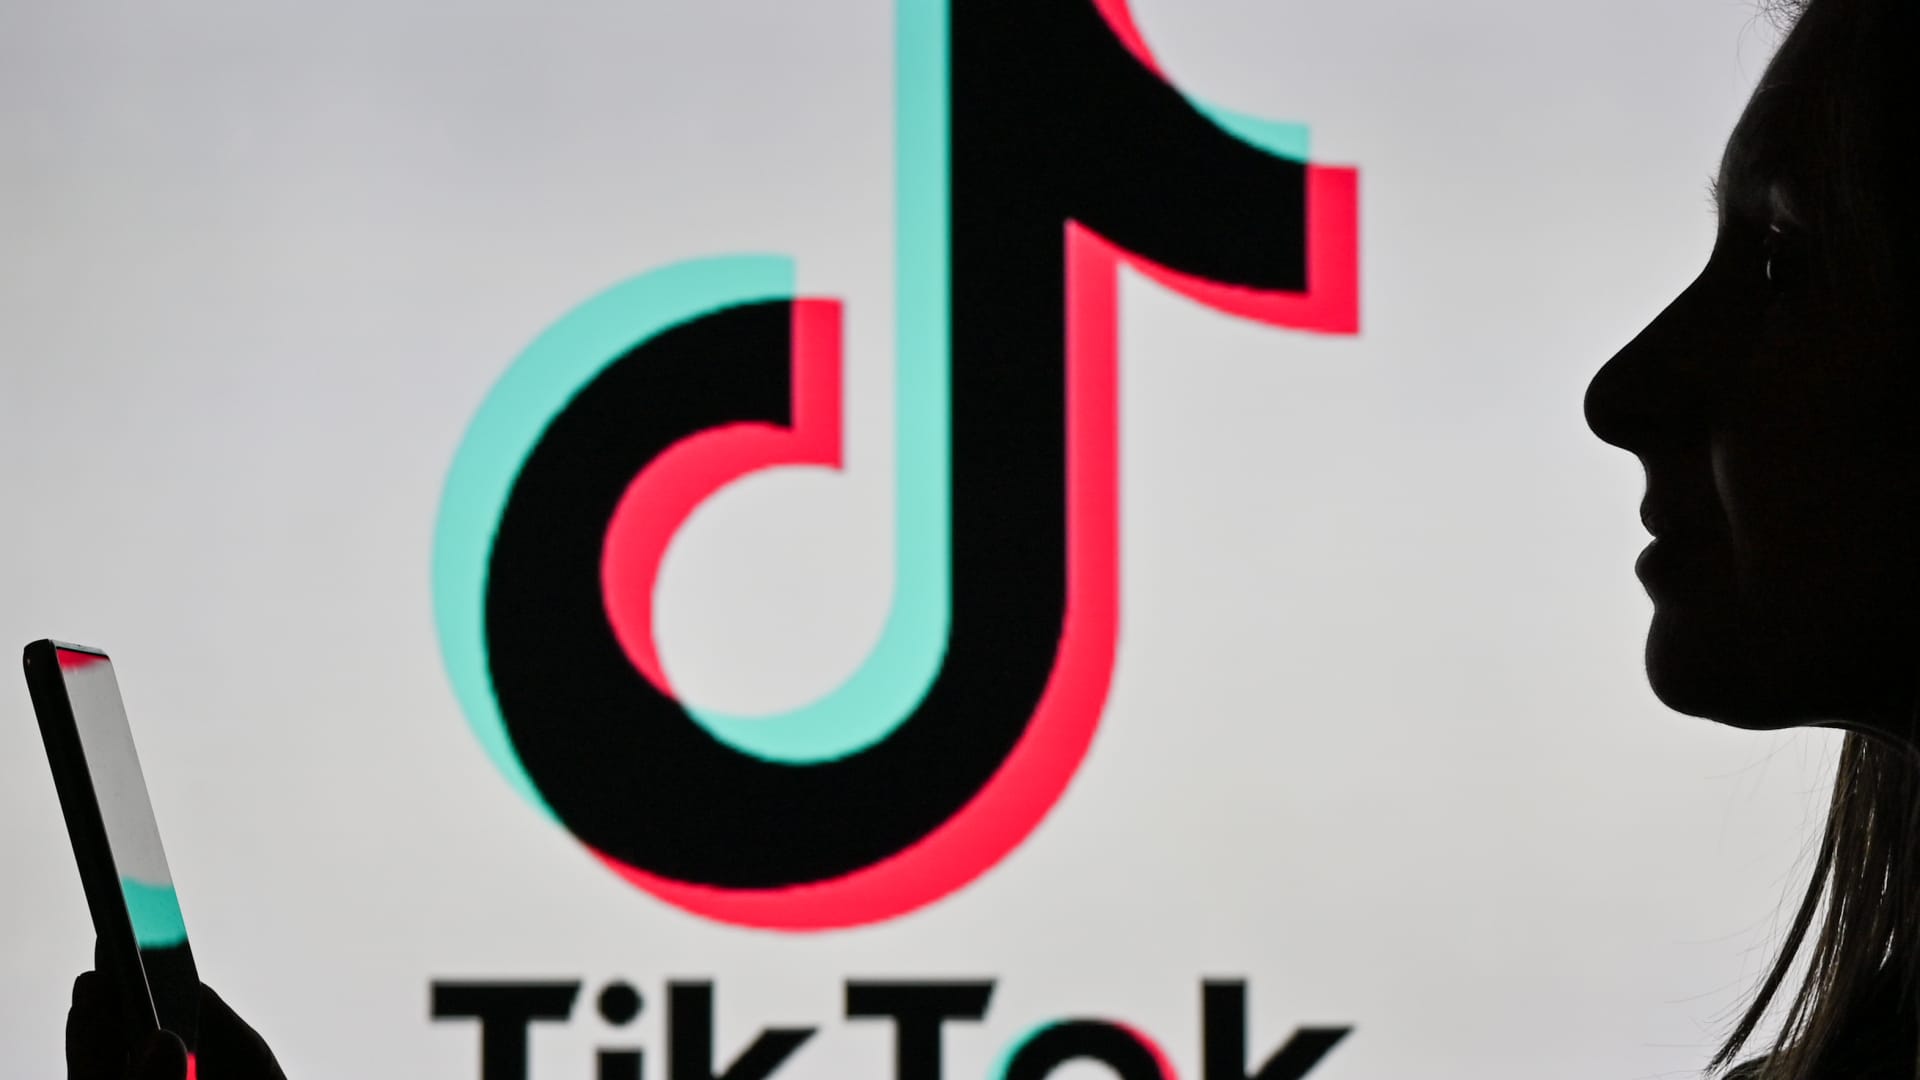 TikTok may face $29 million UK fine for failing to protect kids' privacy